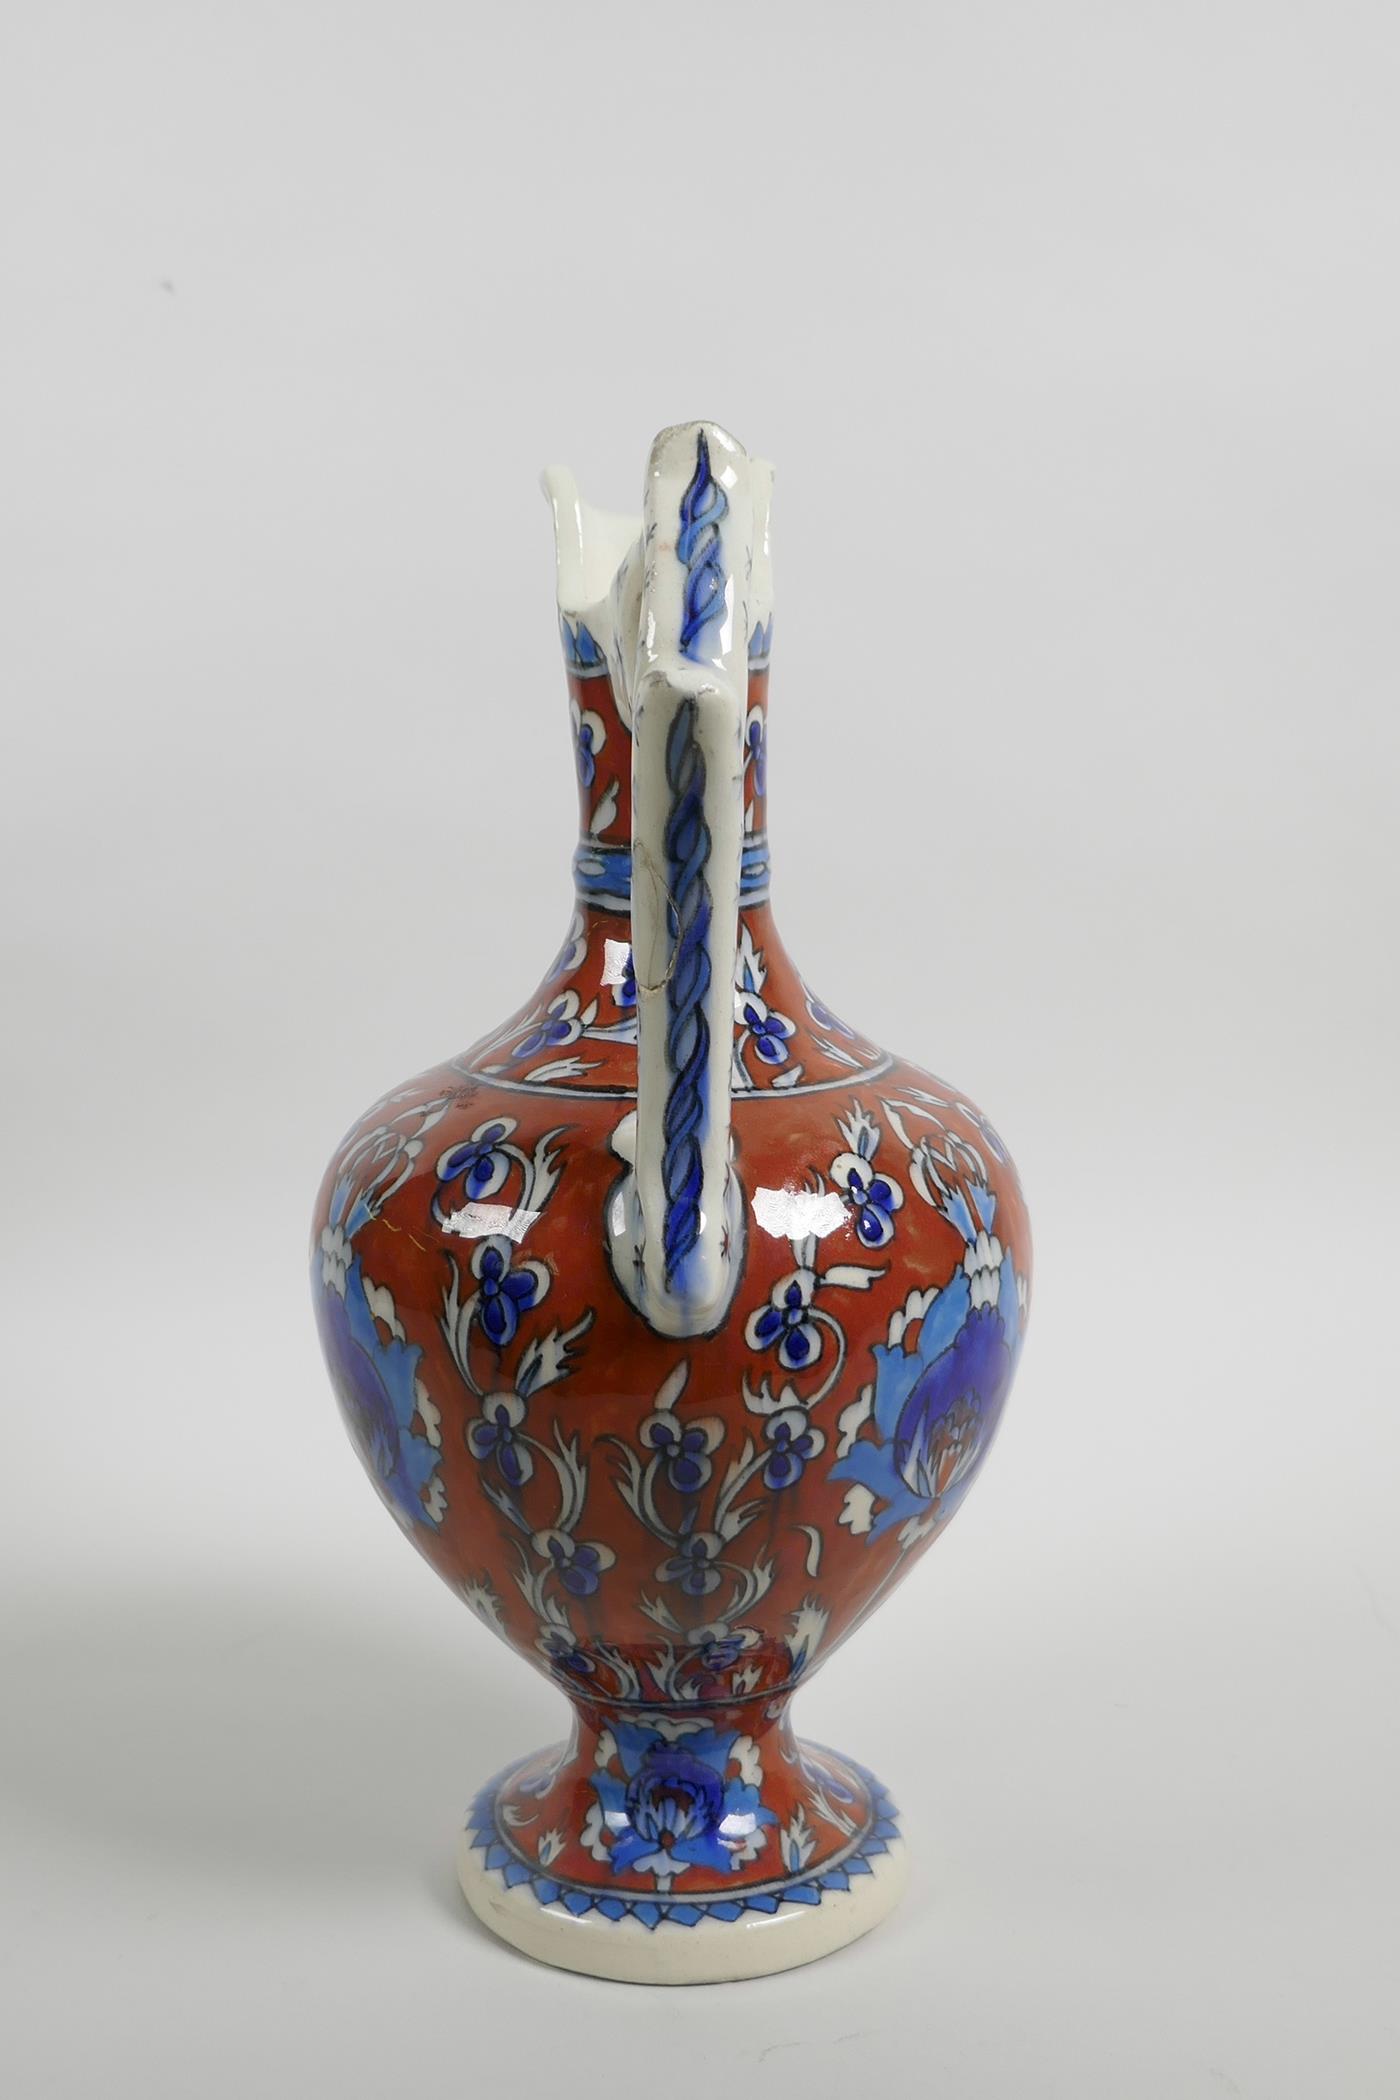 An early C20th Turkish Kutahya pottery ewer with traditional floral decoration, repair to handle, - Image 4 of 7